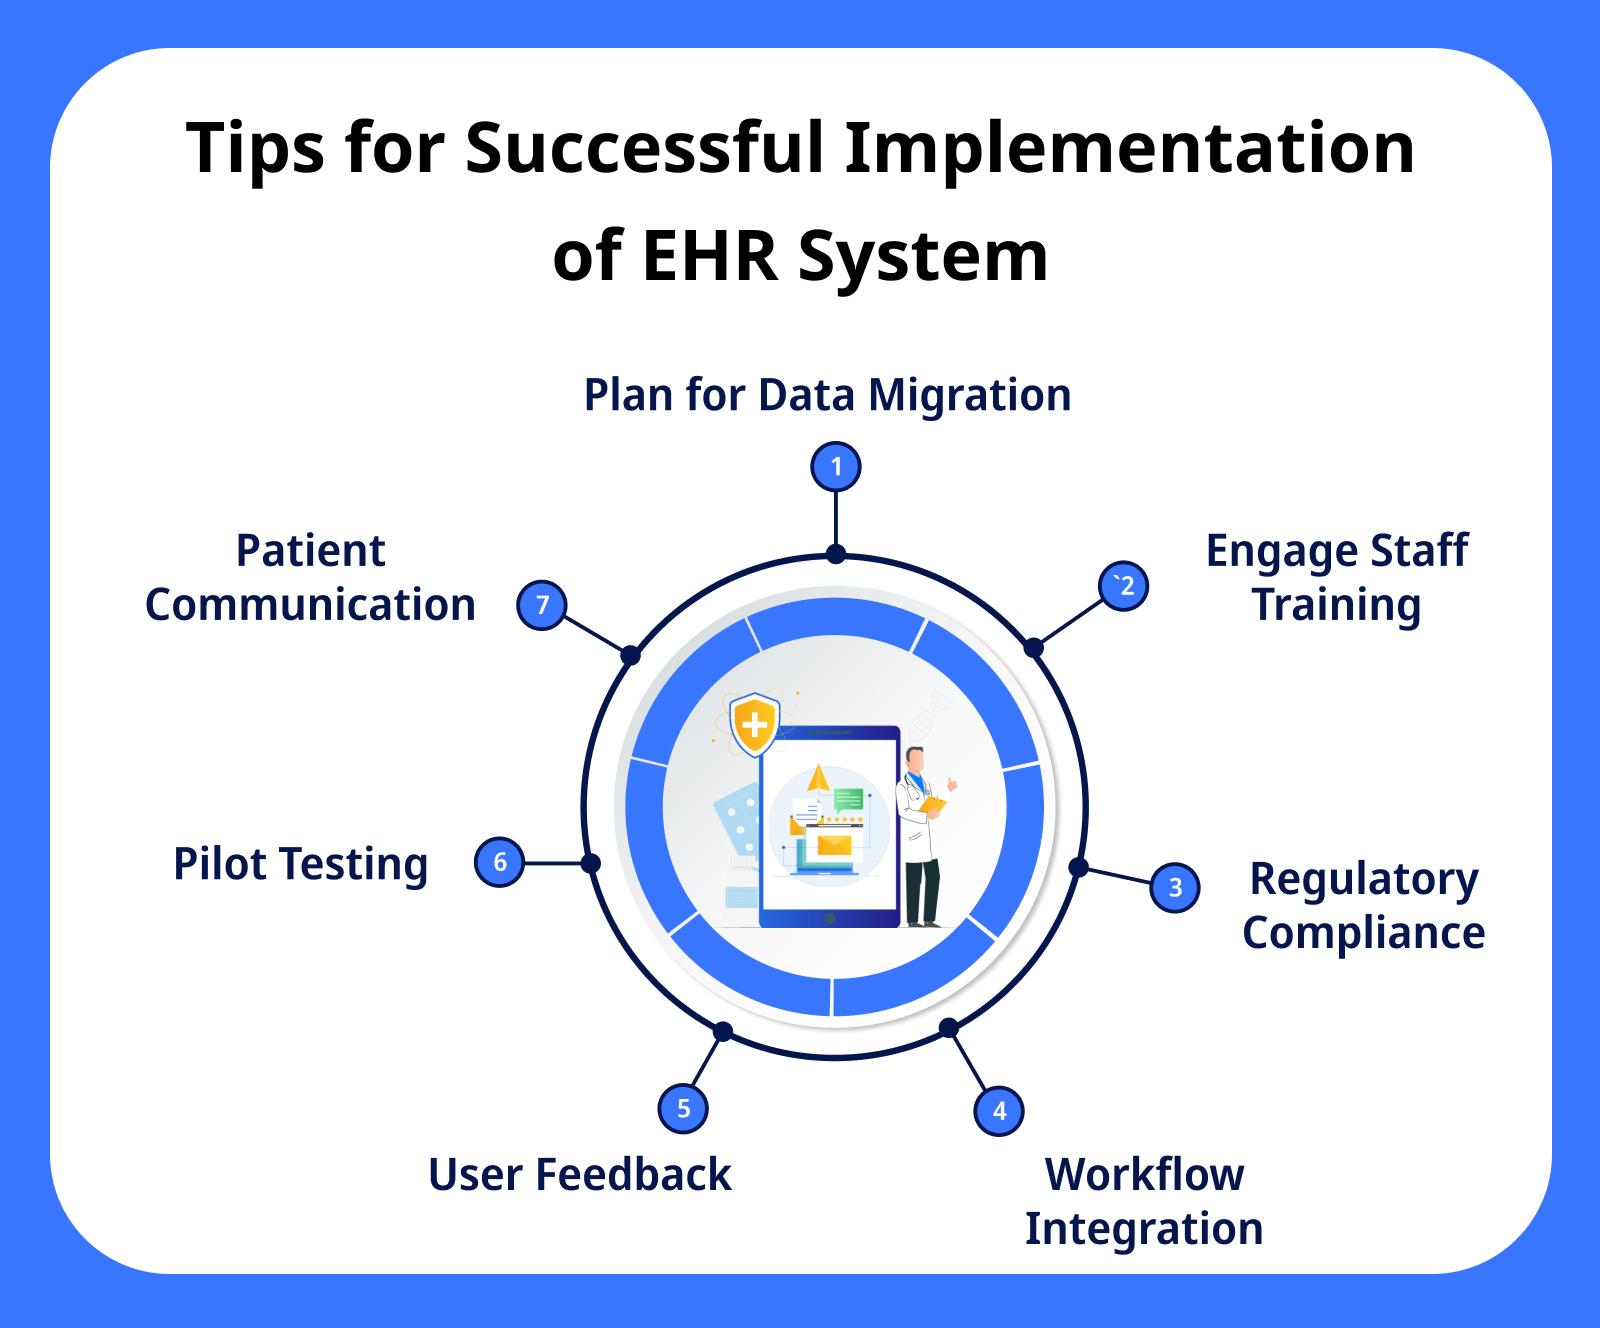 Tips for Successful Implementation of EHR System